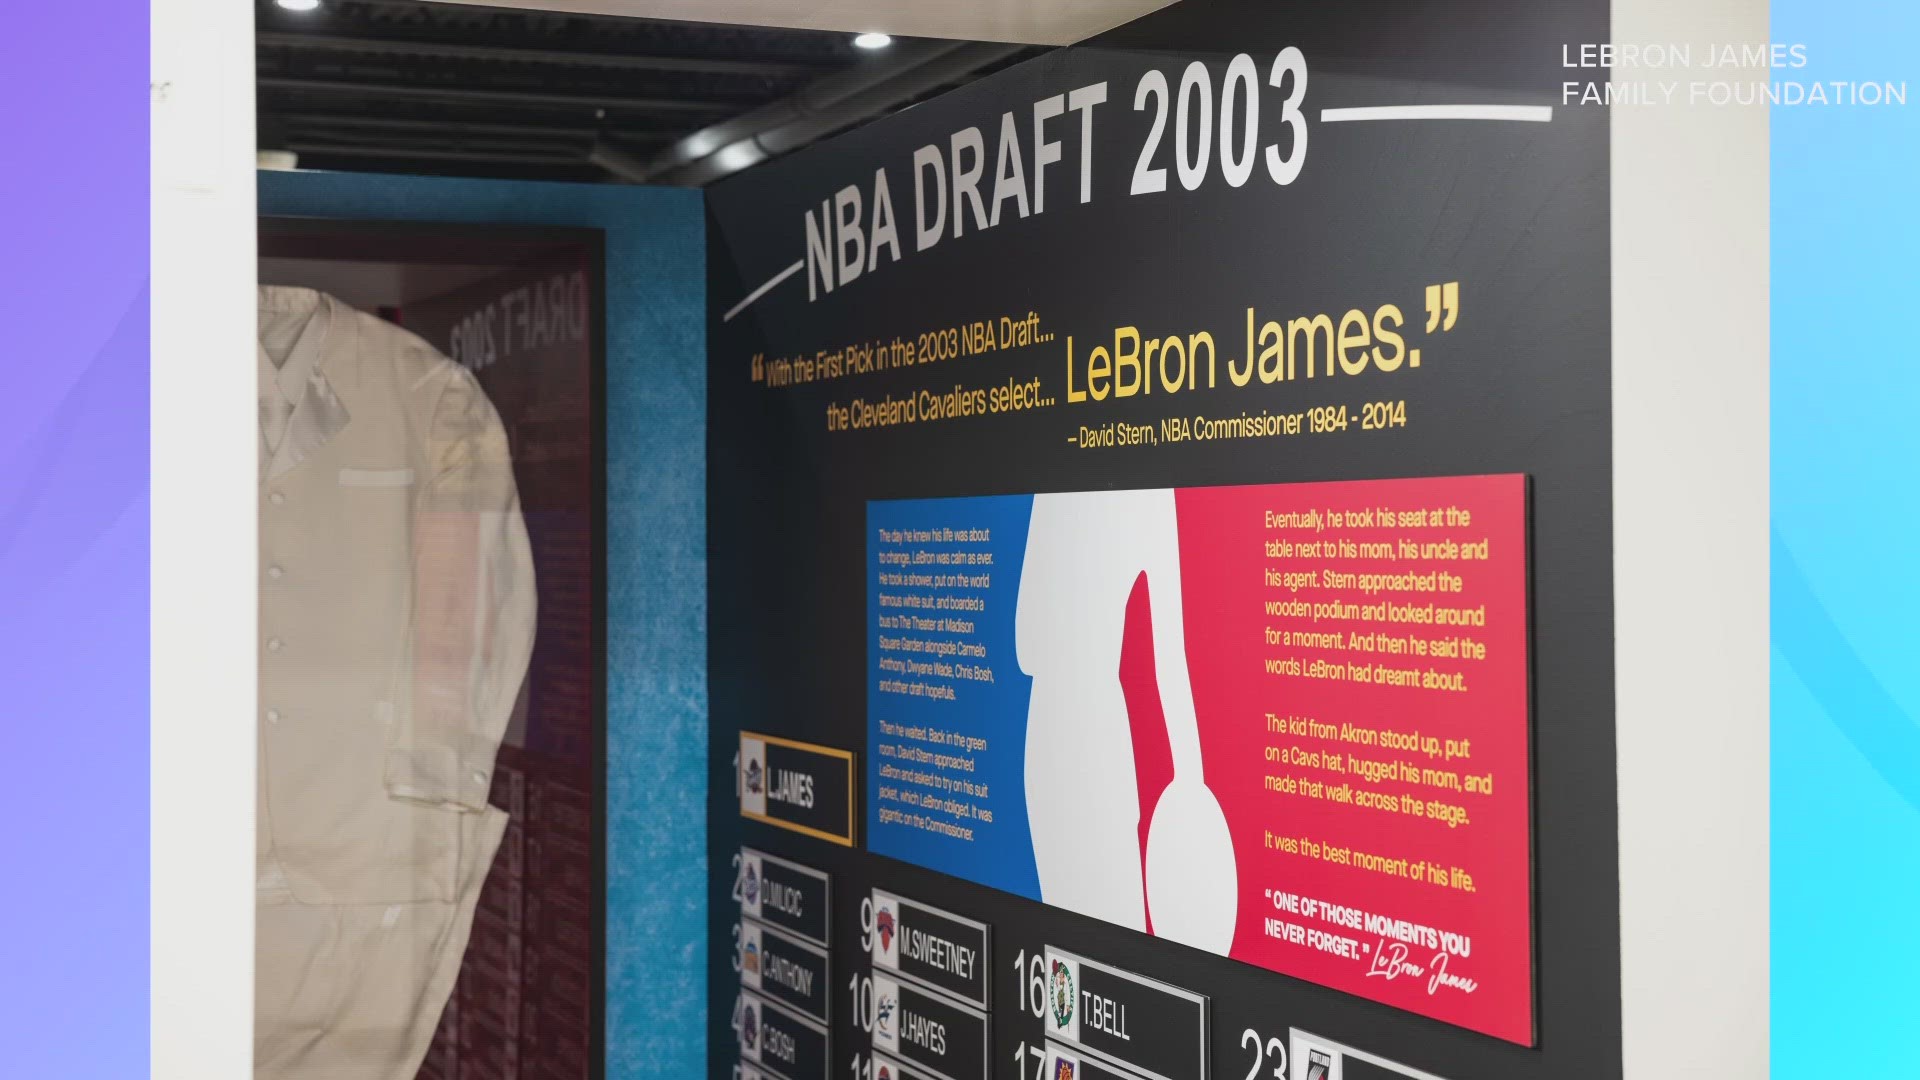 "LeBron James' Home Court" is set to open on November 25. Tickets to the museum are on sale and cost $23.